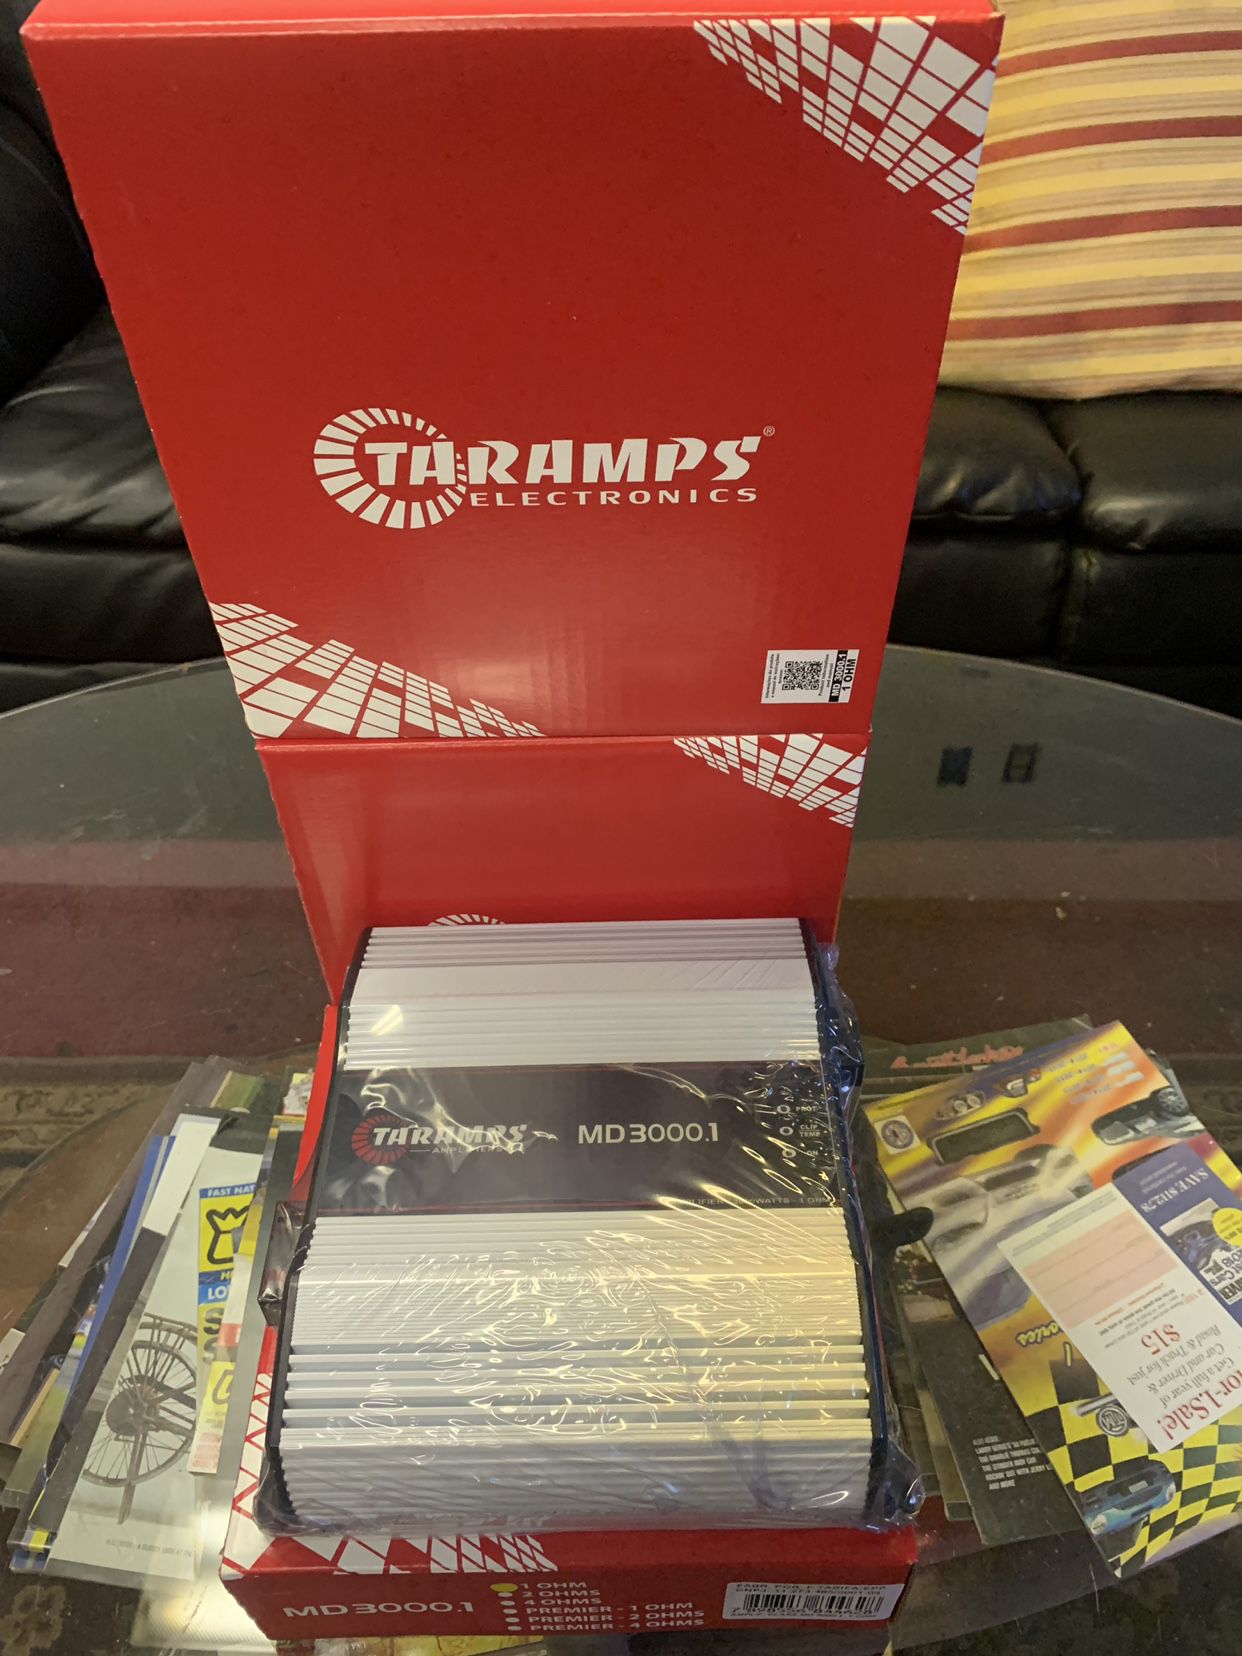 Taramps Car Audio . Car Stereo Amplifier . 3000 watt Super Class D . New Years Super Sale $219 While They Last . New